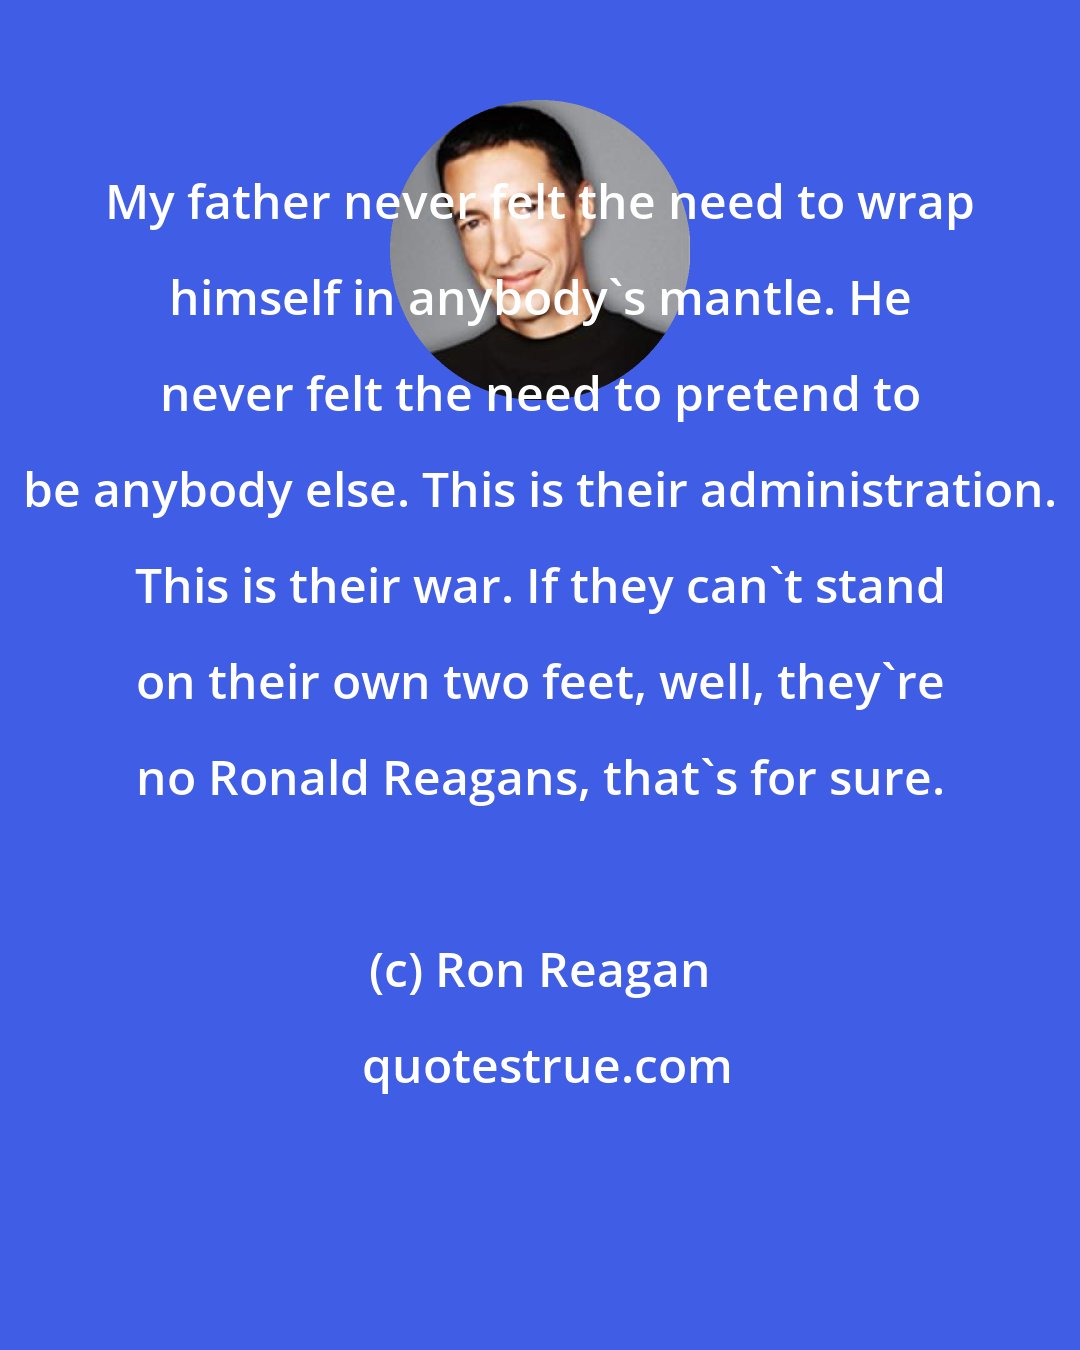 Ron Reagan: My father never felt the need to wrap himself in anybody's mantle. He never felt the need to pretend to be anybody else. This is their administration. This is their war. If they can't stand on their own two feet, well, they're no Ronald Reagans, that's for sure.